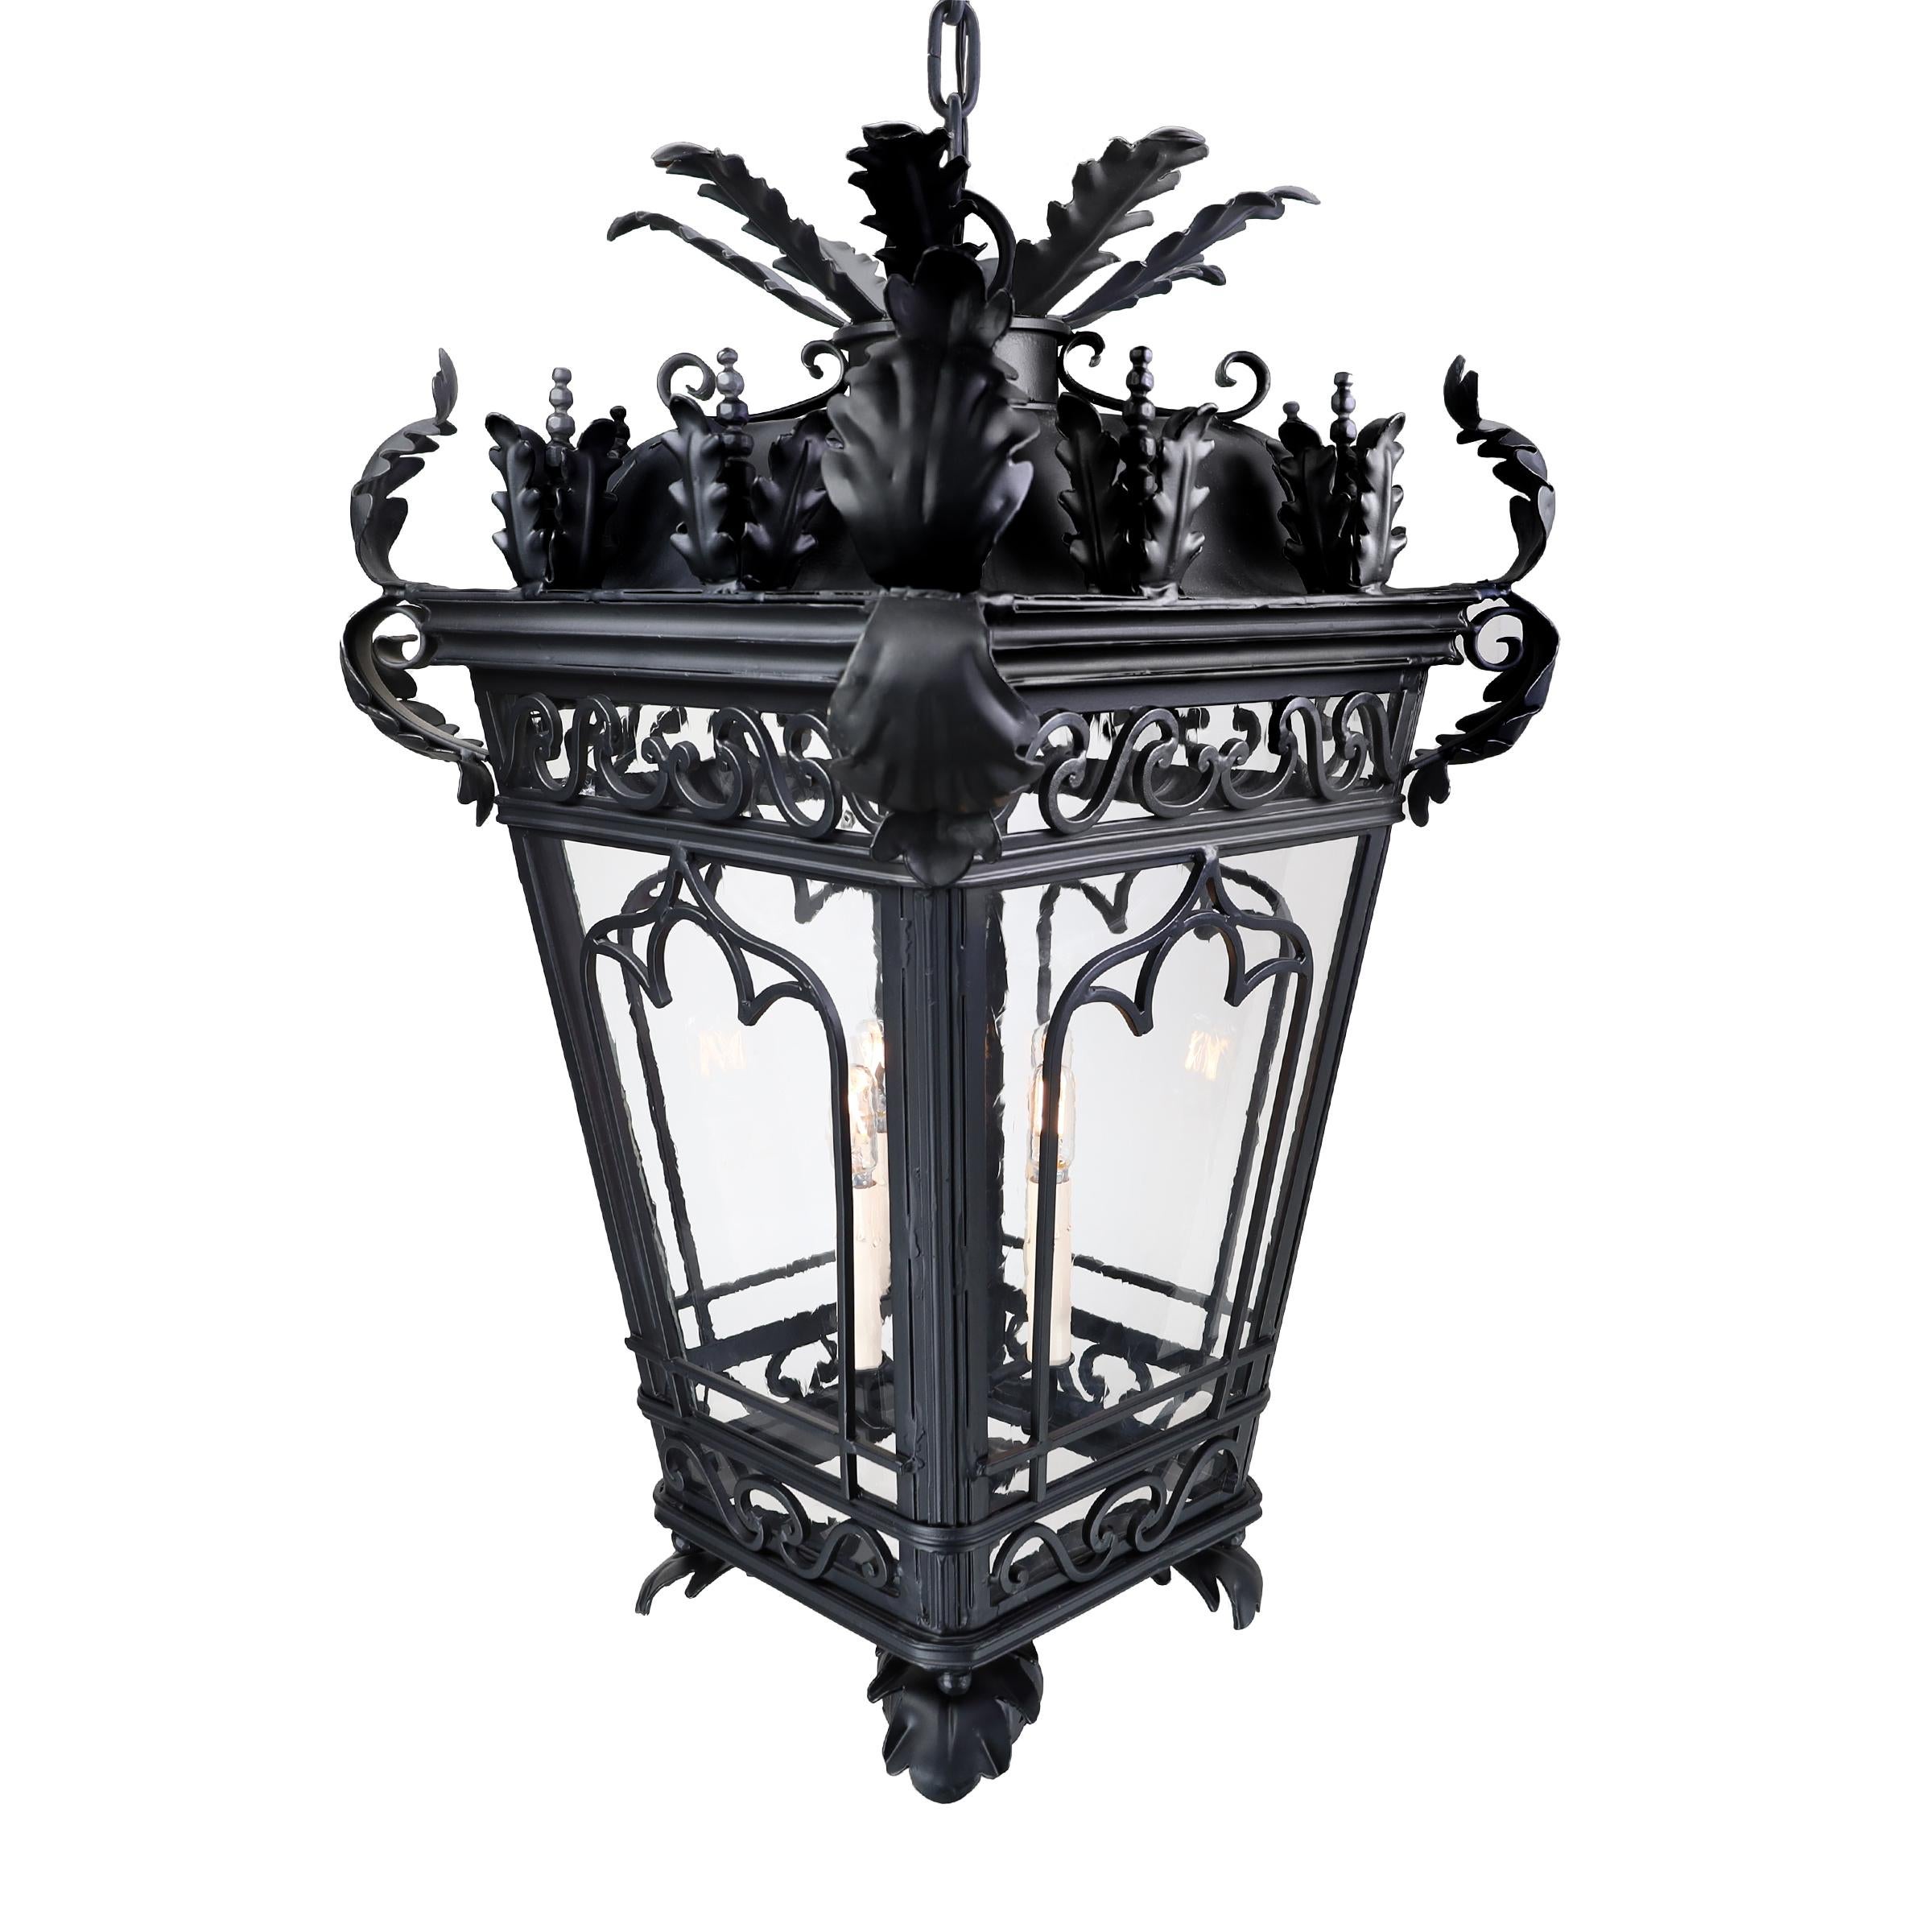 Our Rosa lantern is a Spanish Style, Antique, Ornamental Pendant Light Fixture we have refurbished by hand with premium, high quality, black finish paint and premium antique glass, that gives it a more old world feel and vintage aesthetic. This